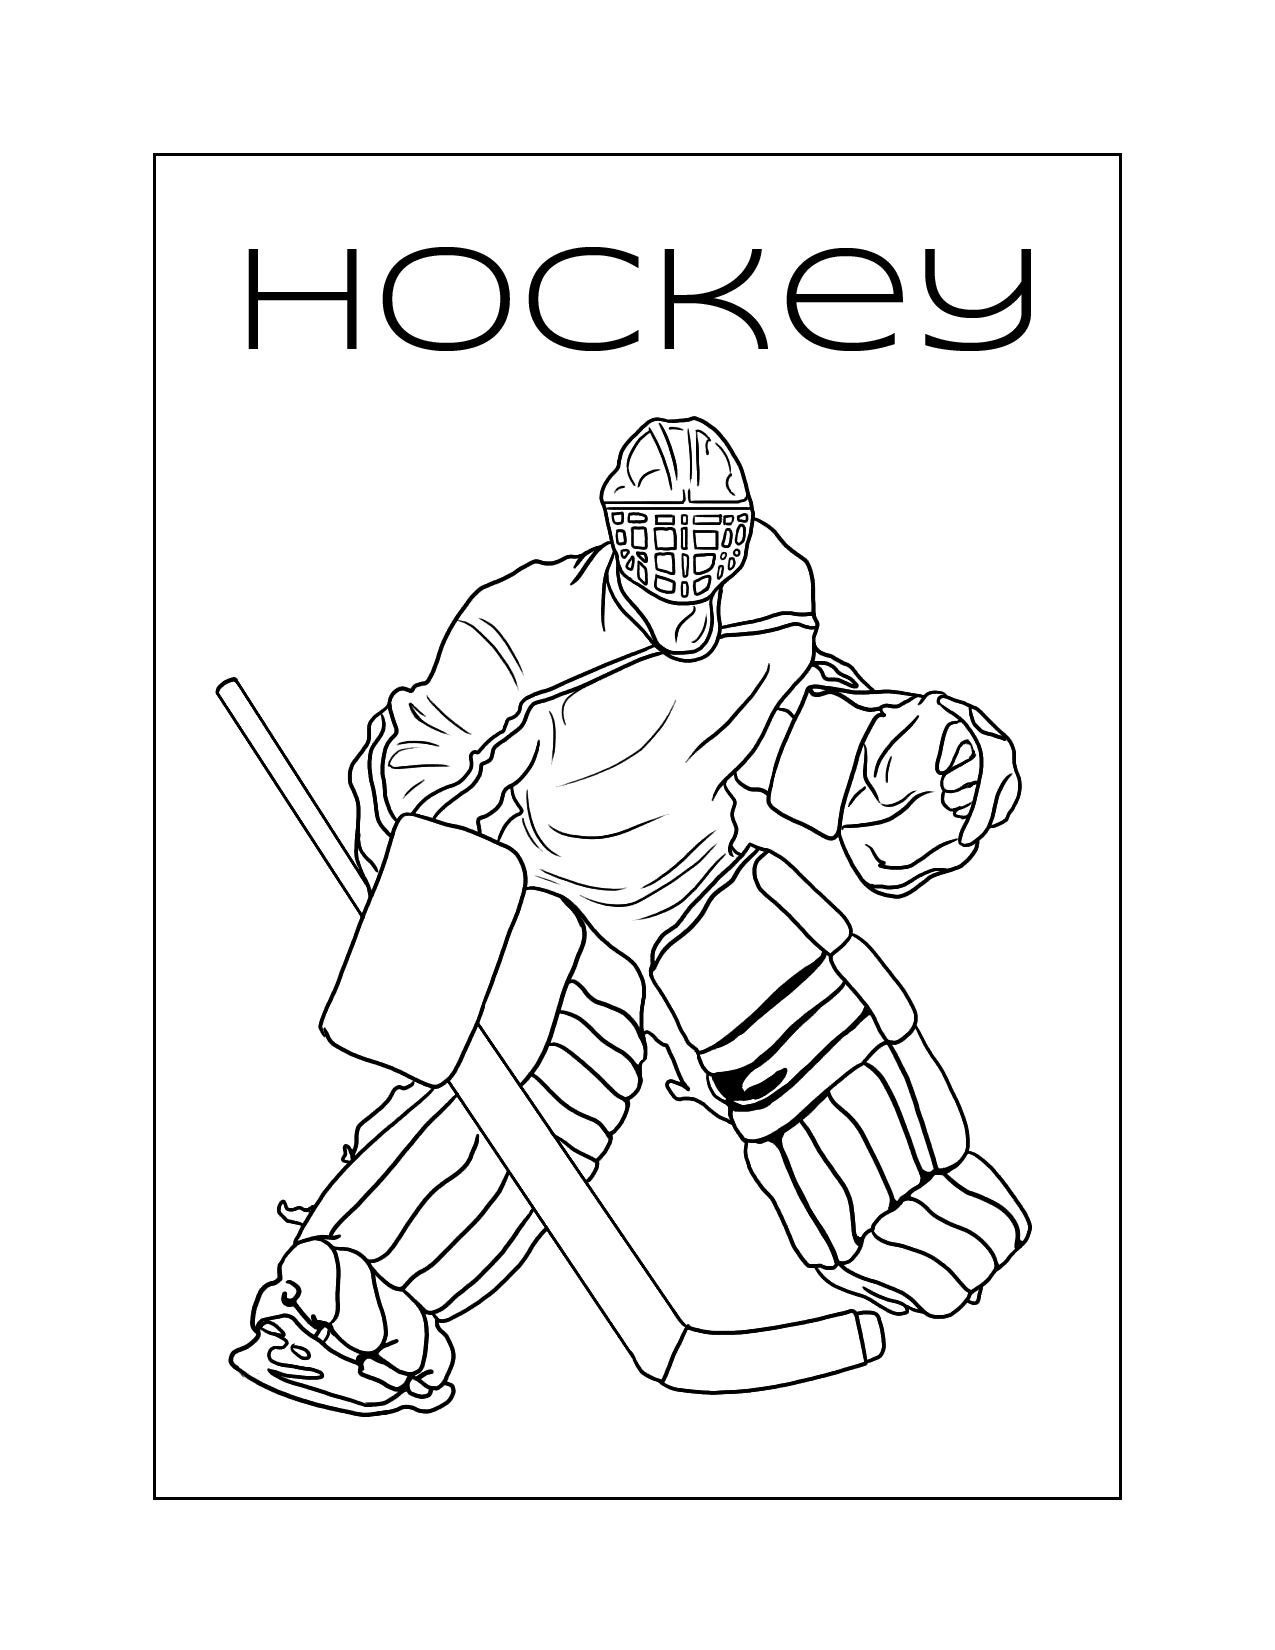 Hockey Goalie Coloring Pages